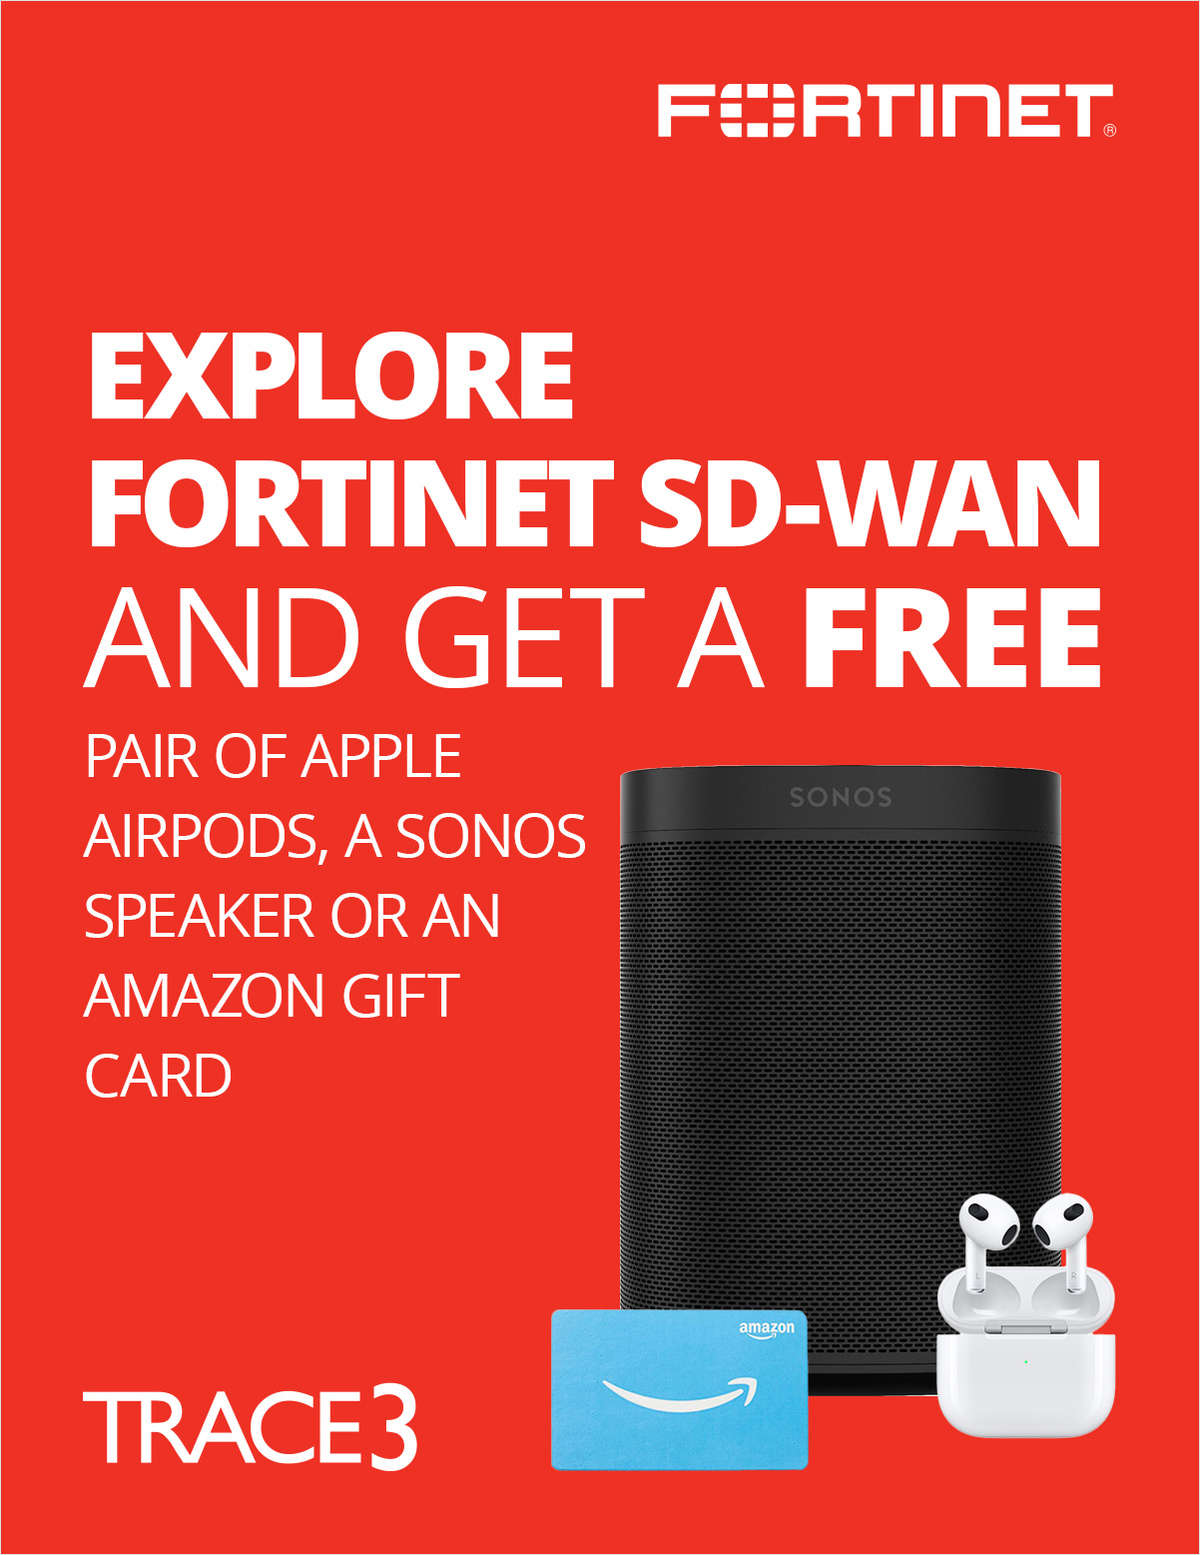 Explore Fortinet SD-WAN and Get a Free Pair of Apple AirPods, a Sonos Speaker or an Amazon Gift Card